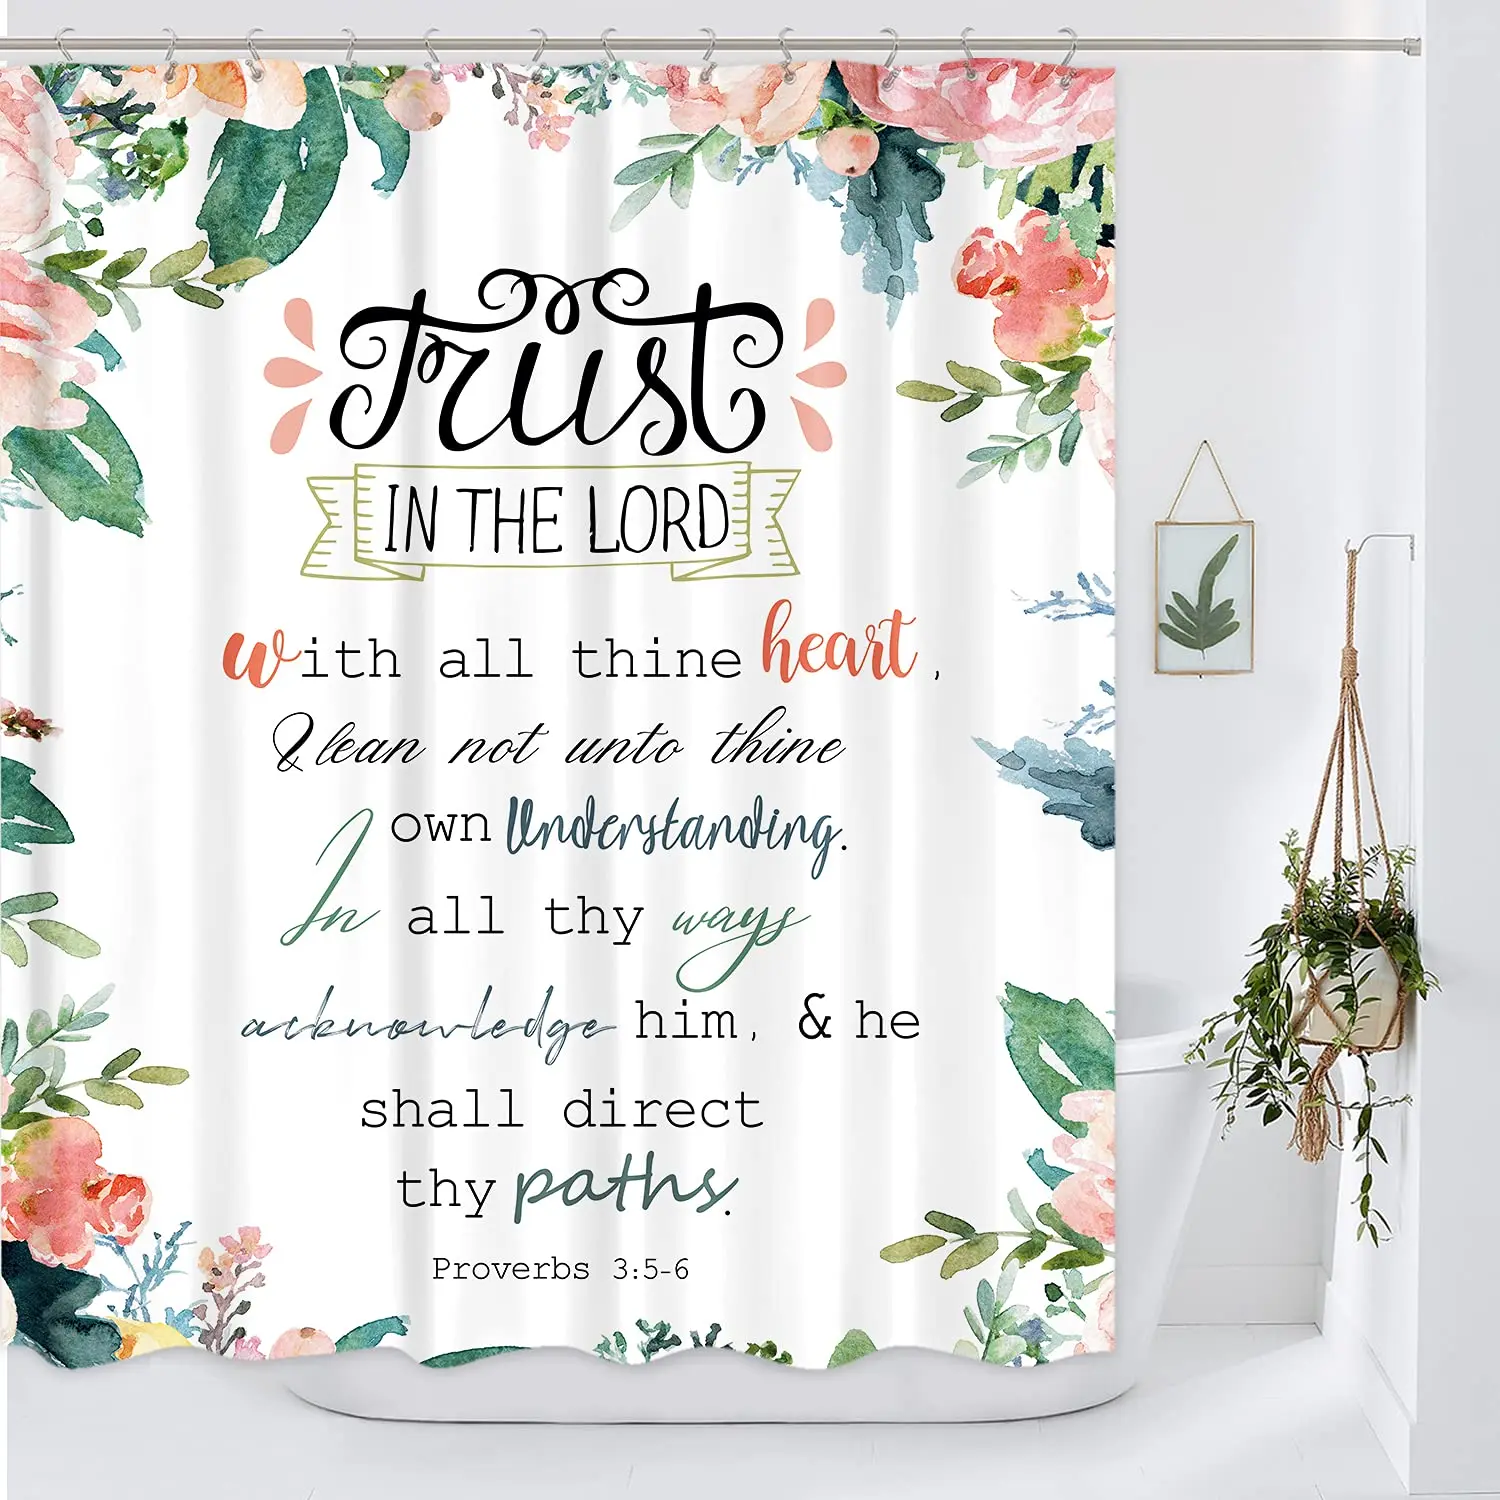 https://ae01.alicdn.com/kf/S14afea3a25124c69b1de8dc27a01d1d4A/Inspirational-Quote-Shower-Curtain-Bible-Verse-Motivational-Quote-Shower-Curtain-Ink-Paint-Pink-Teal-Marble-Abstract.jpg